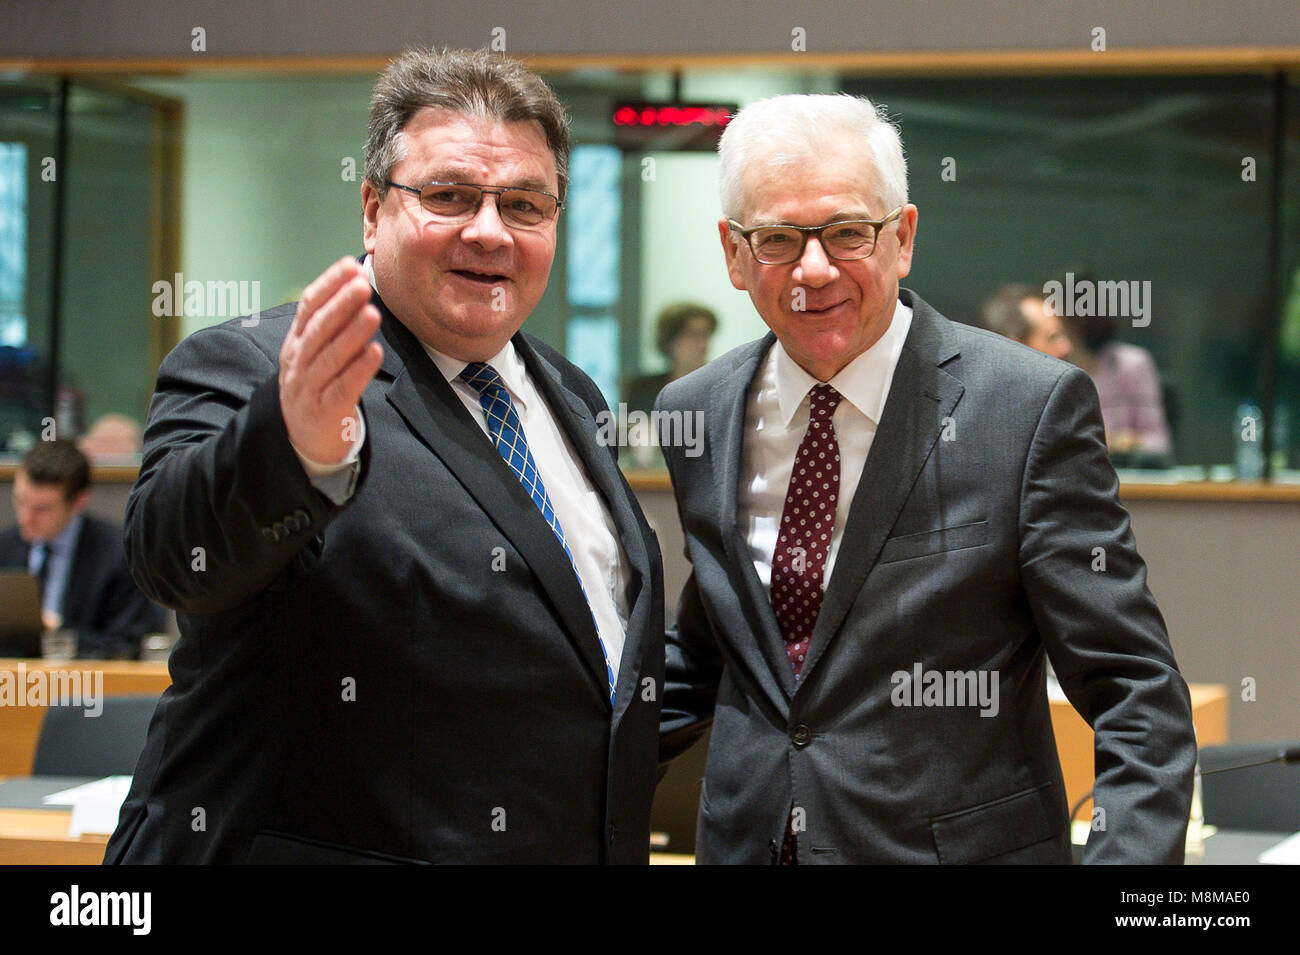 Brussels, Belgium. 19th Mar, 2018. Lithuanian Foreign Minister Linas Antanas Linkevi?ius (L) and Jacek Czaputowicz, Polish Foreign Minister at the start of FAC the EU Foreign Ministers Council at European Council headquarters in Brussels, Belgium on 19.03.2018 by Wiktor Dabkowski | usage worldwide Credit: dpa/Alamy Live News Stock Photo